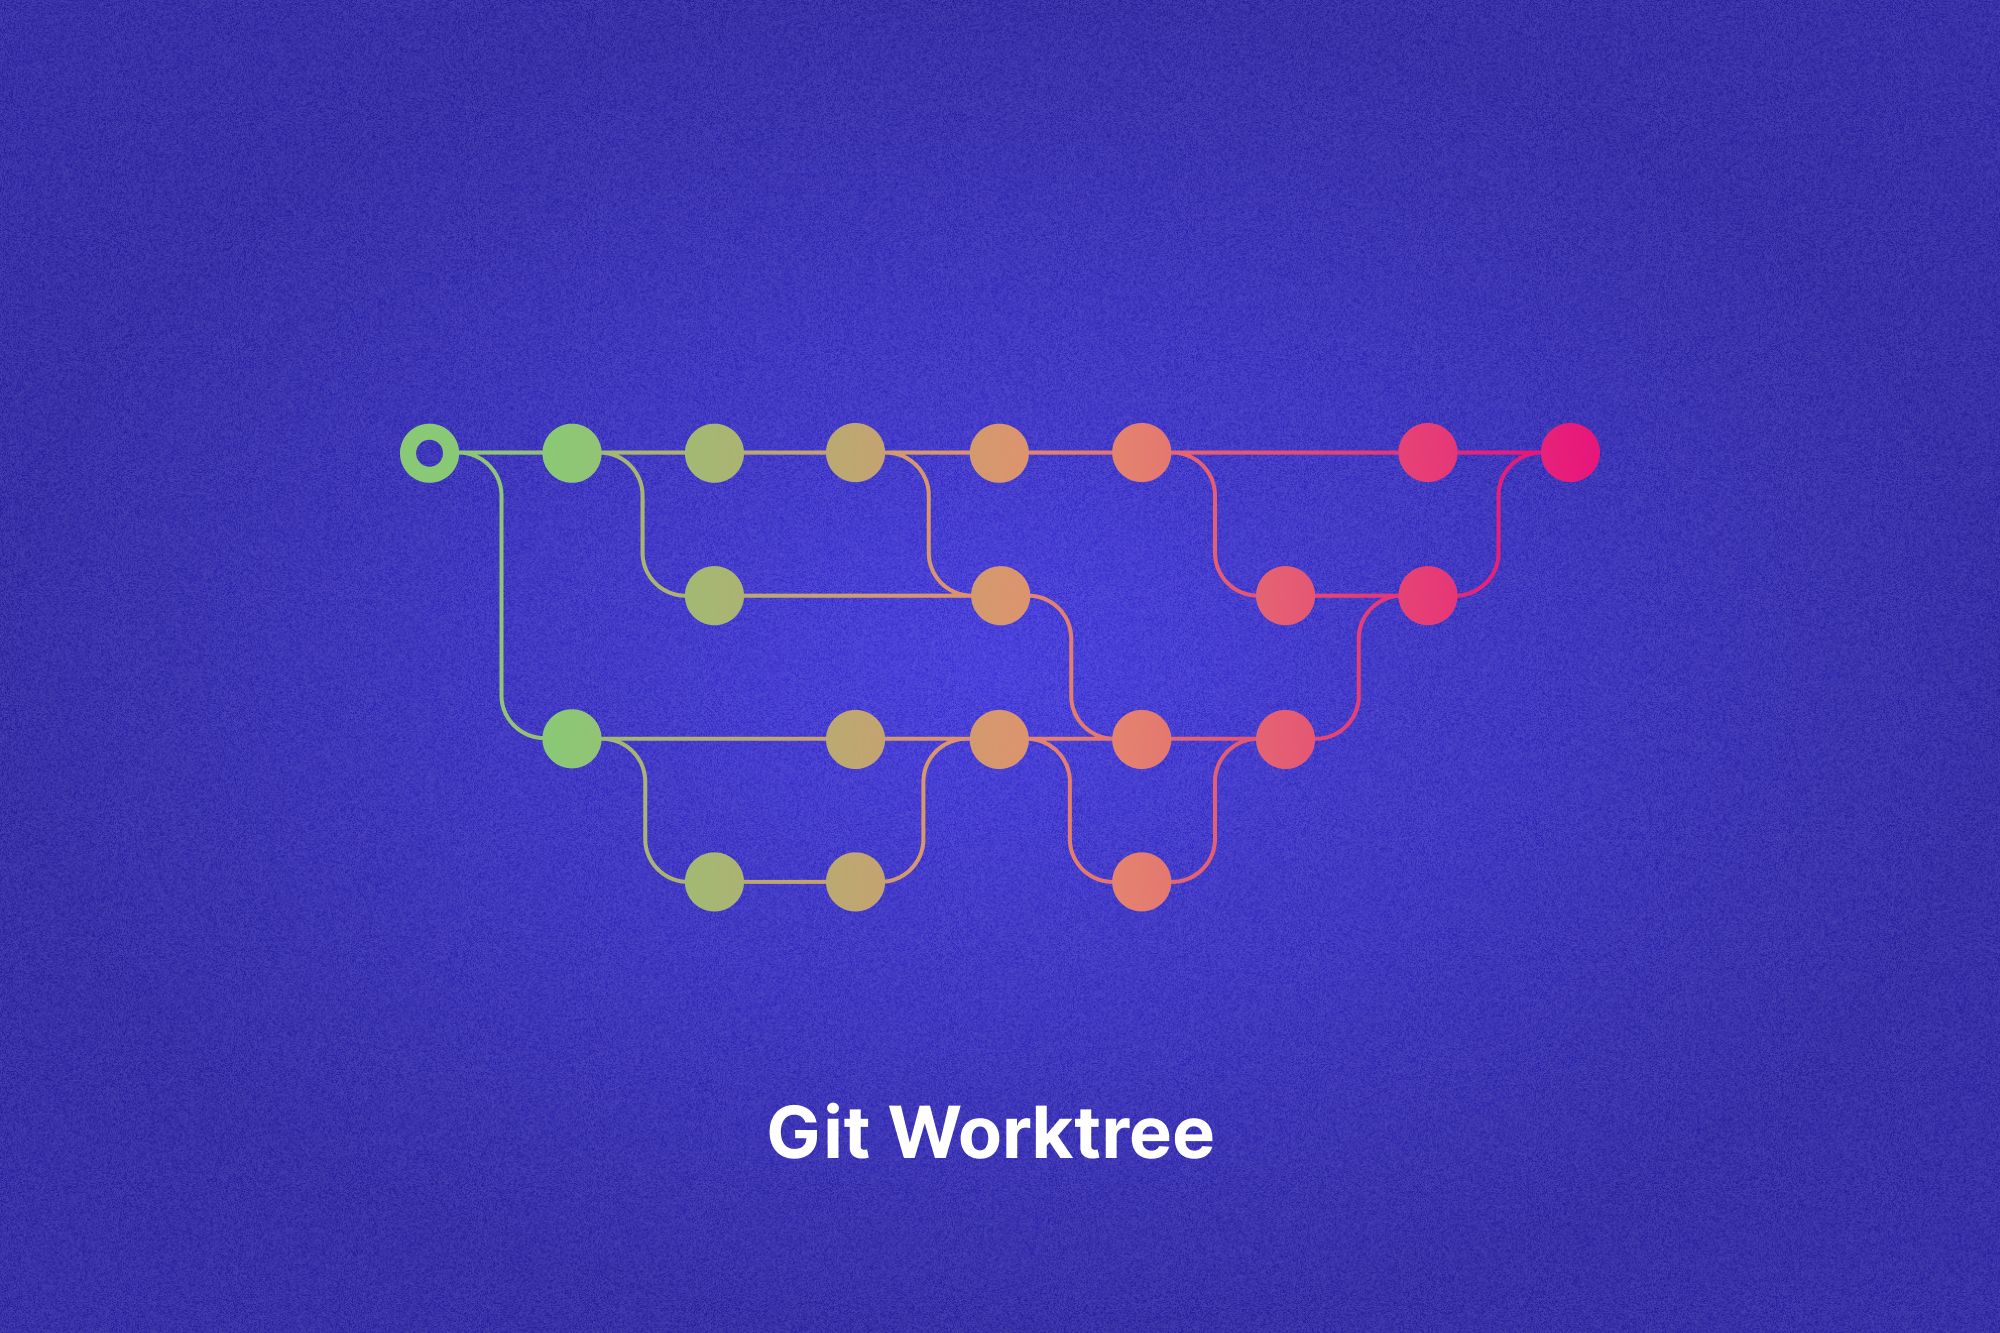 How To Use Git Worktree To Optimize Git Workflow